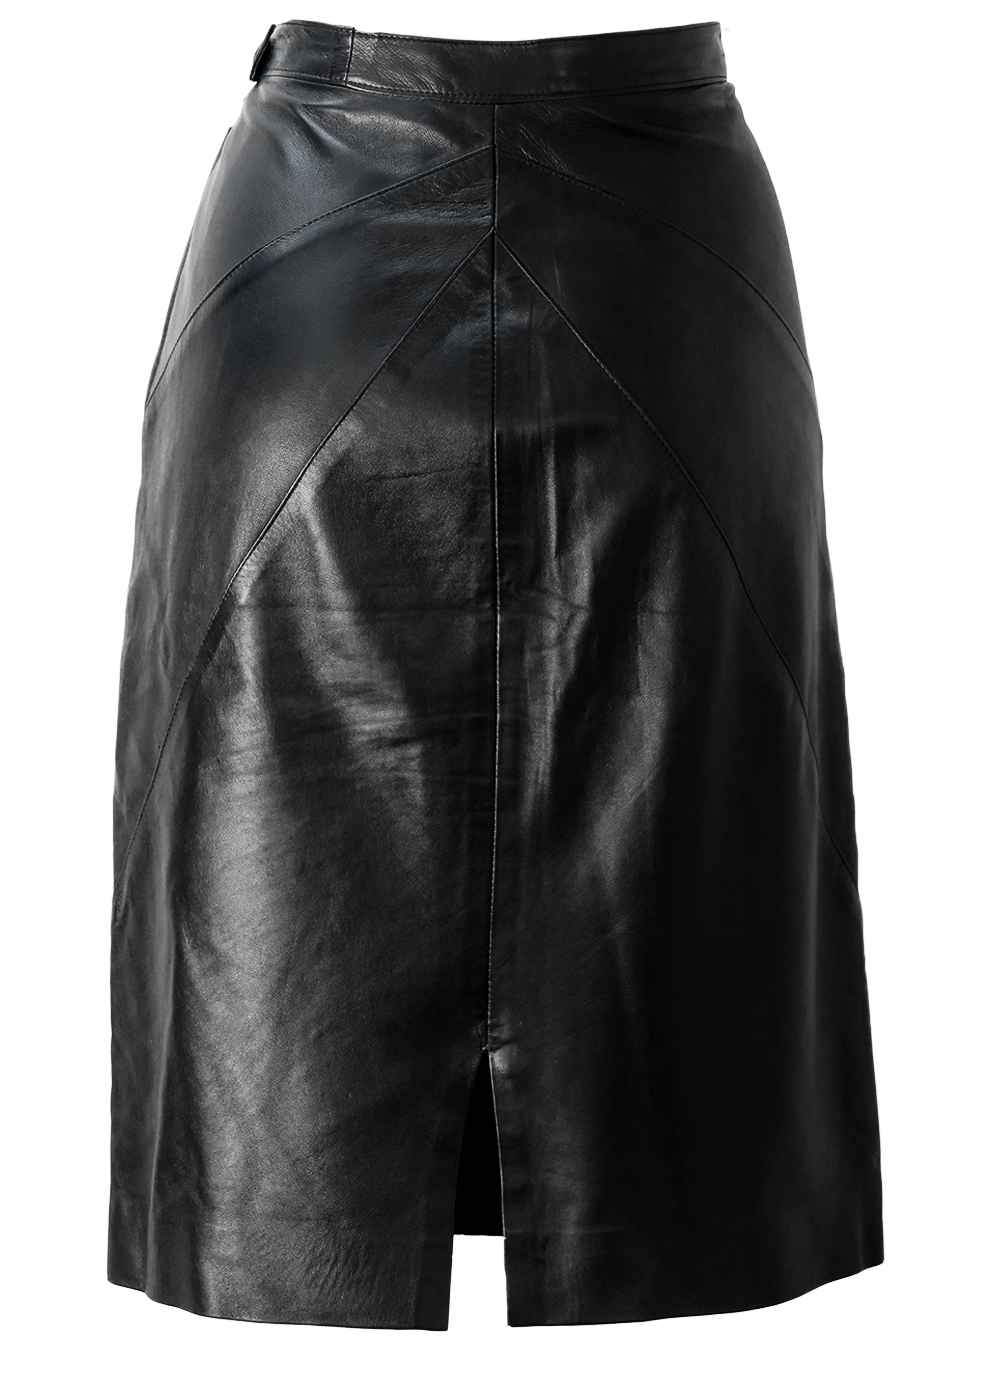 Black Leather Below the Knee, Midi Skirt with Front Hidden Seam Pockets ...